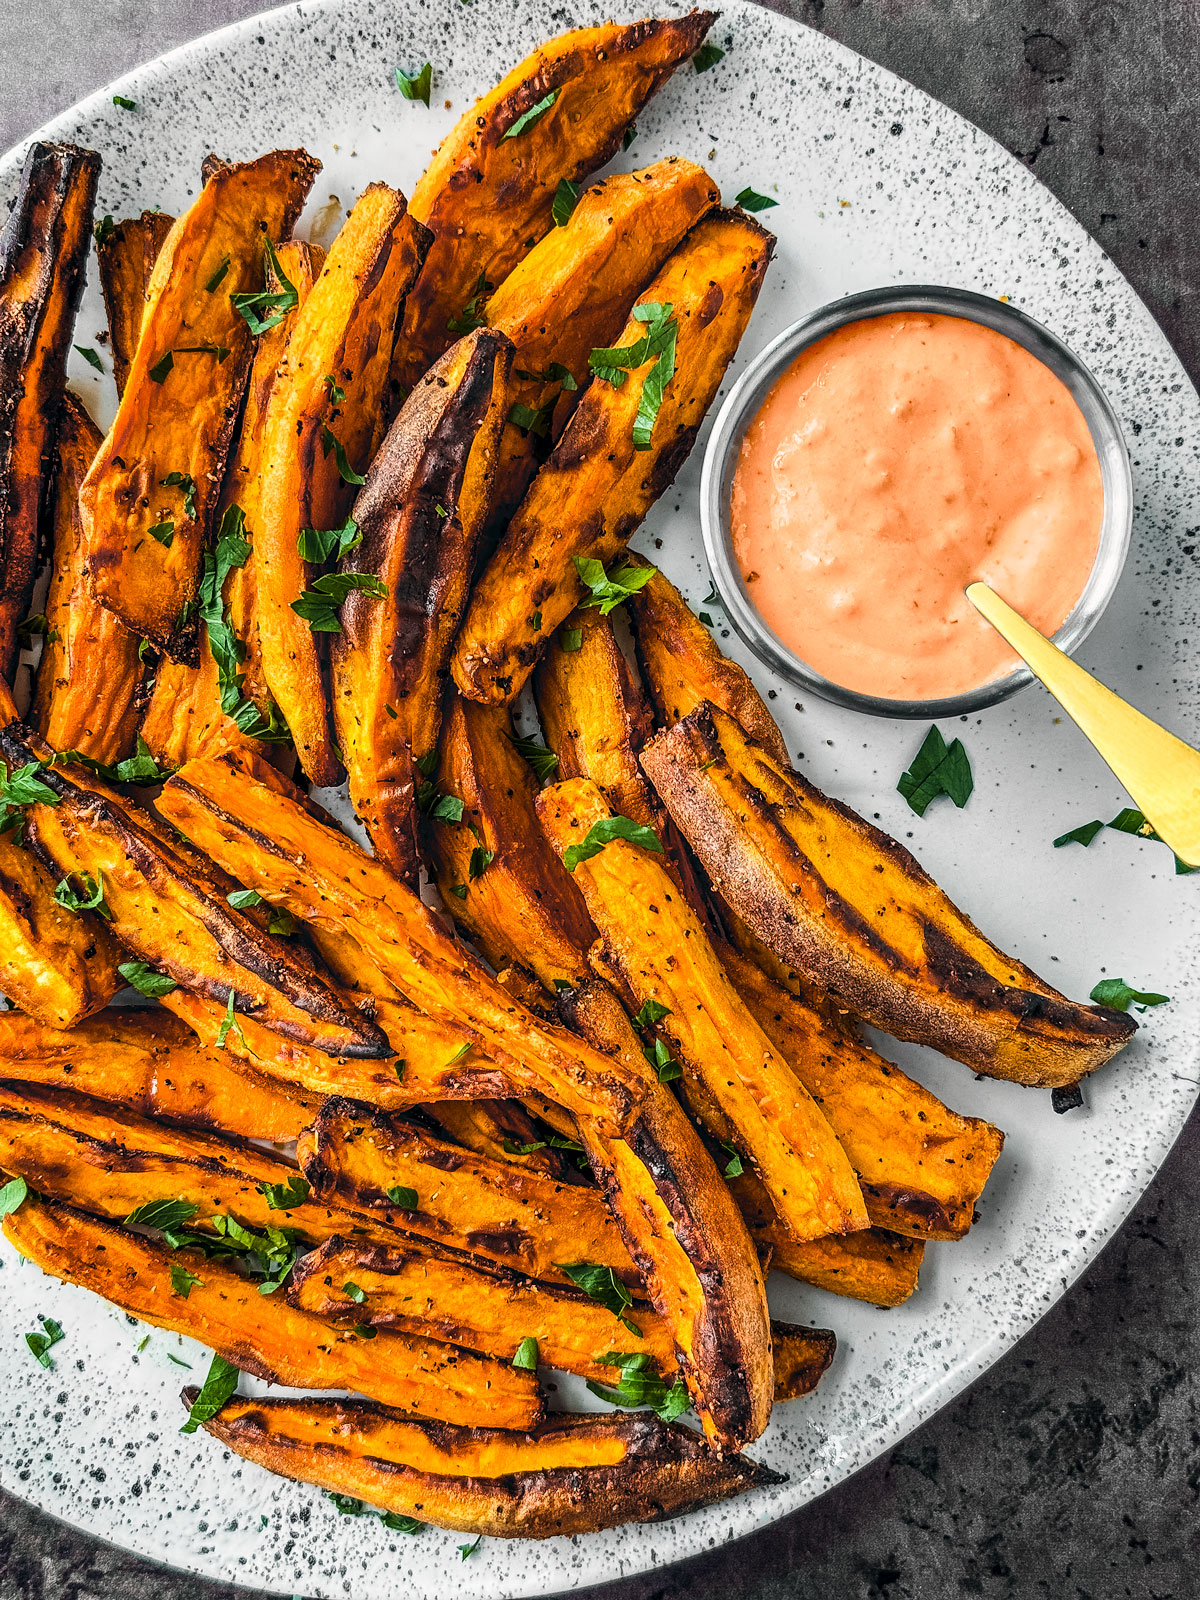 Sweet potato wedges on a platter with a dish of sweet and spicy yogurt dipping sauce.